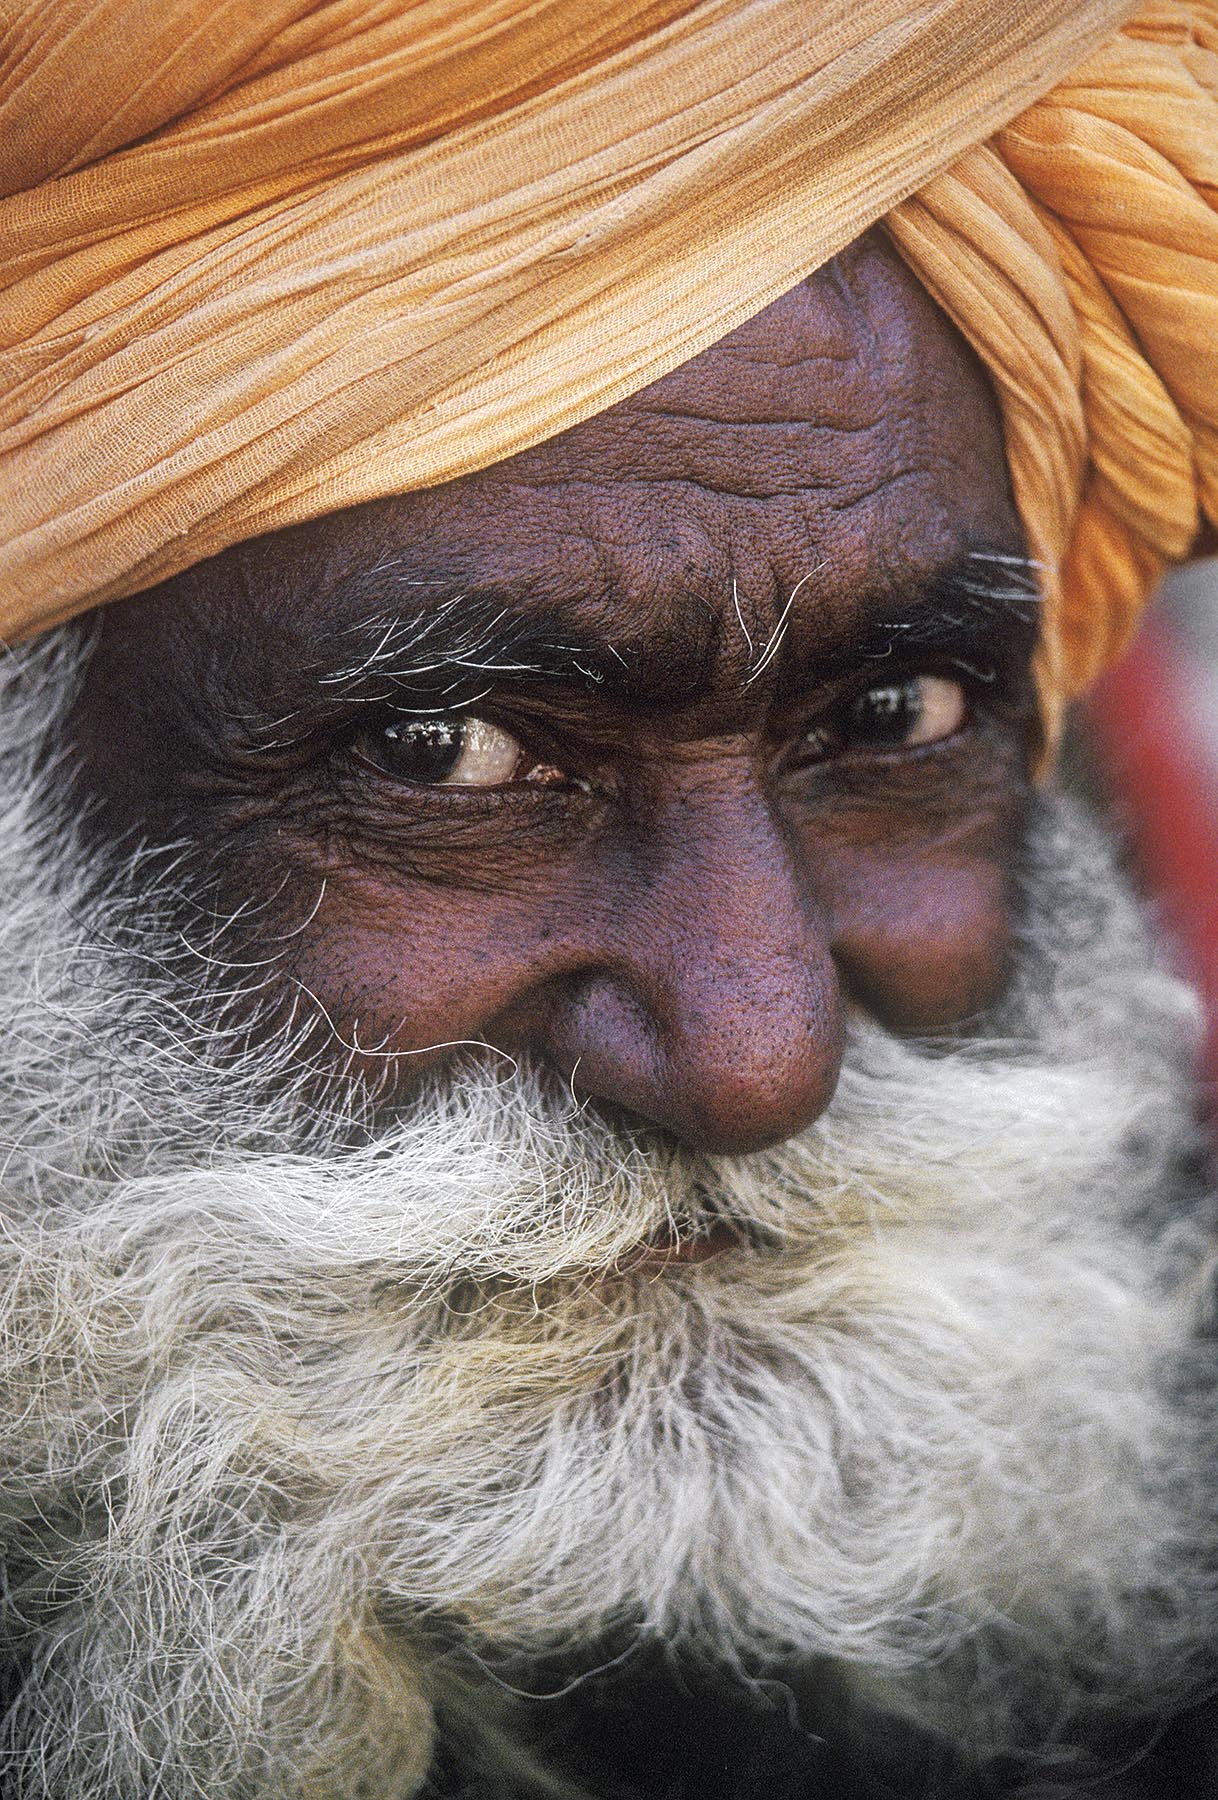 RAJASTHANI MAN with a large MUSTACHE and BEARD and a TURBAN (head wrap) at the PUSHKAR CAMEL FAIR - RAJASTHAN, INDIA